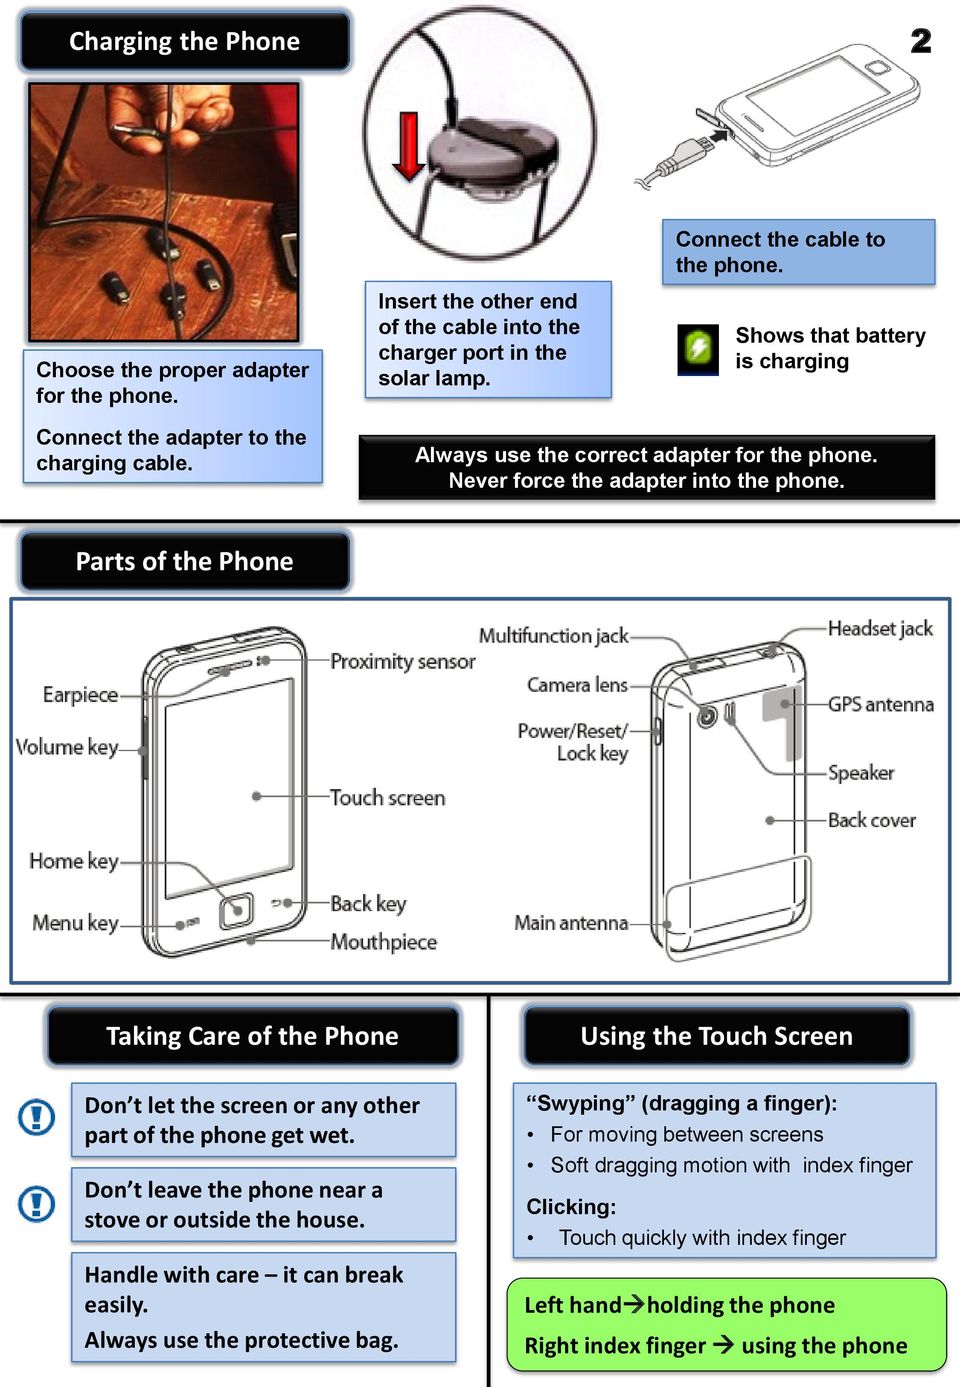 Parts of the Phone Taking Care of the Phone Using the Touch Screen Don t let the screen or any other part of the phone get wet. Don t leave the phone near a stove or outside the house.